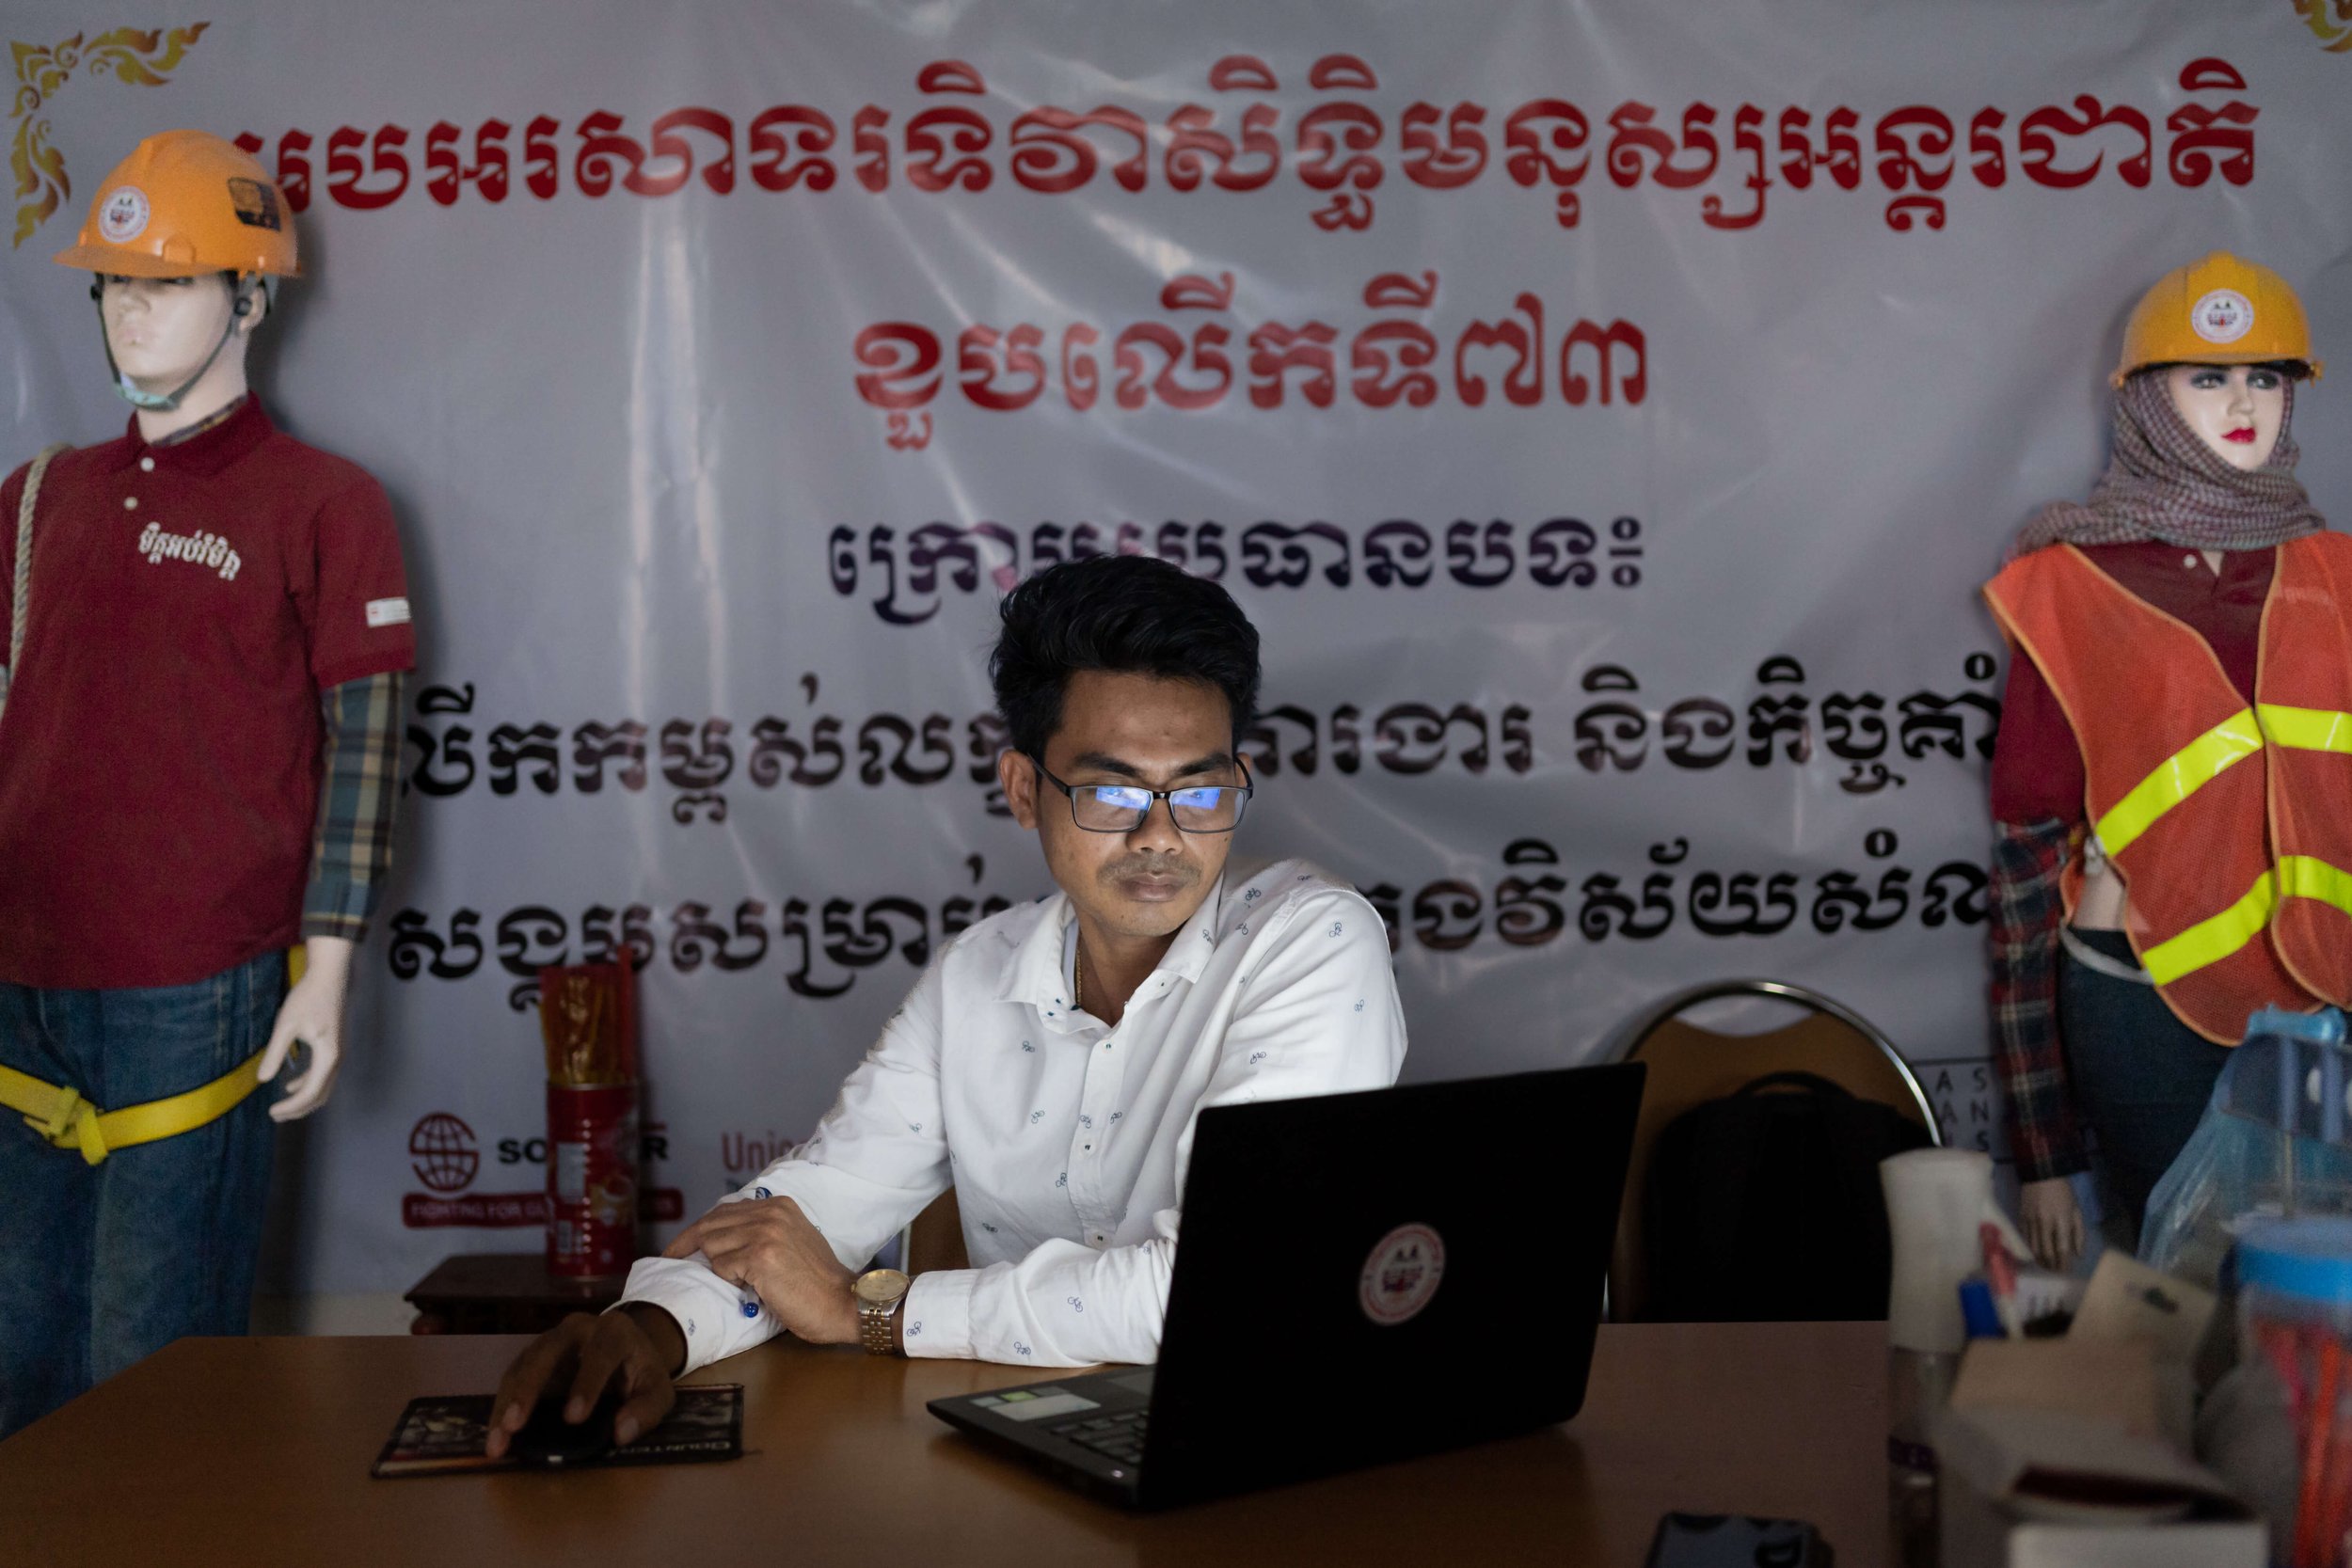  Yann Thy, Secretary General of the Building and Wood Workers Trade Union Federation (BWTUC), at his office in Phnom Penh. BWTUC is the largest and most active Union in Cambodia advocating for construction workers’ rights. Thy narrowly avoided a seri